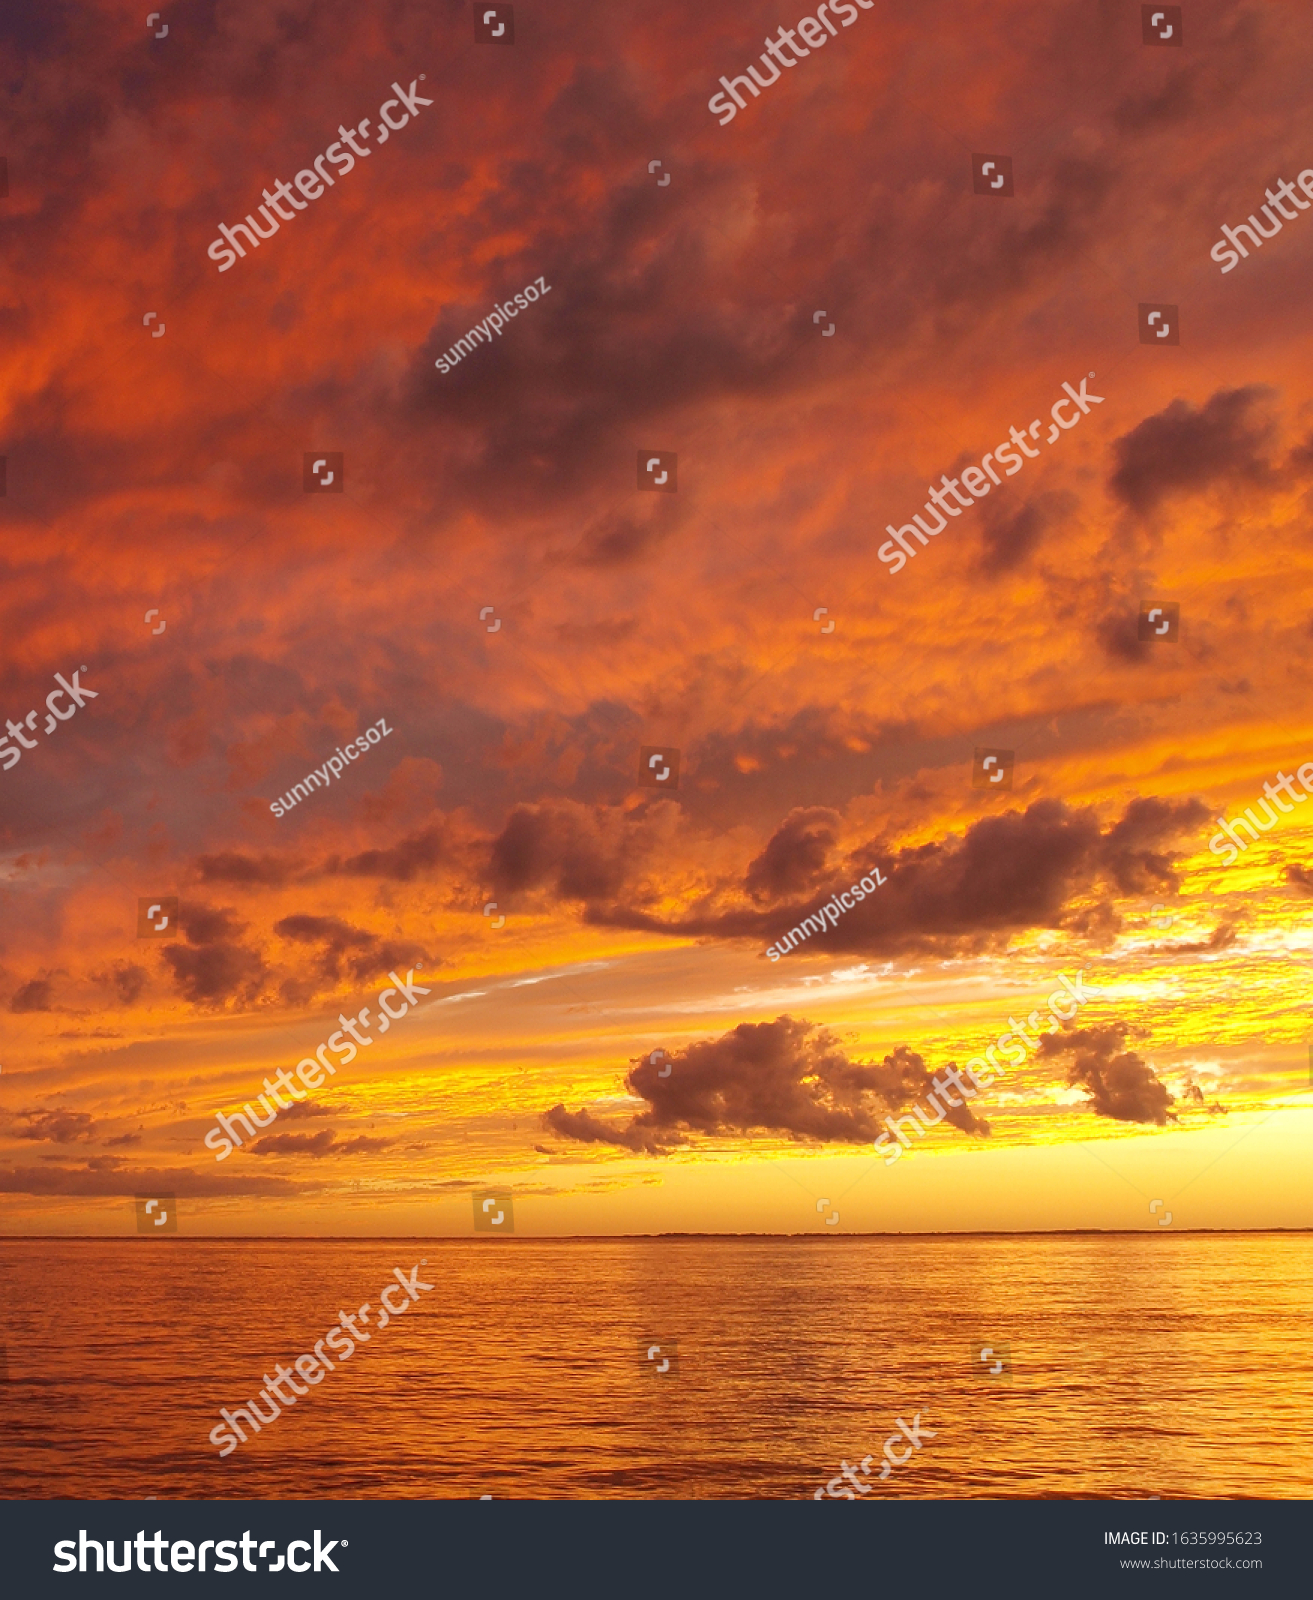 A sunny inspirational orange coloured stratocumulus cloudy coastal sunset seascape over the ocean with water reflections. Queensland, Australia. #1635995623